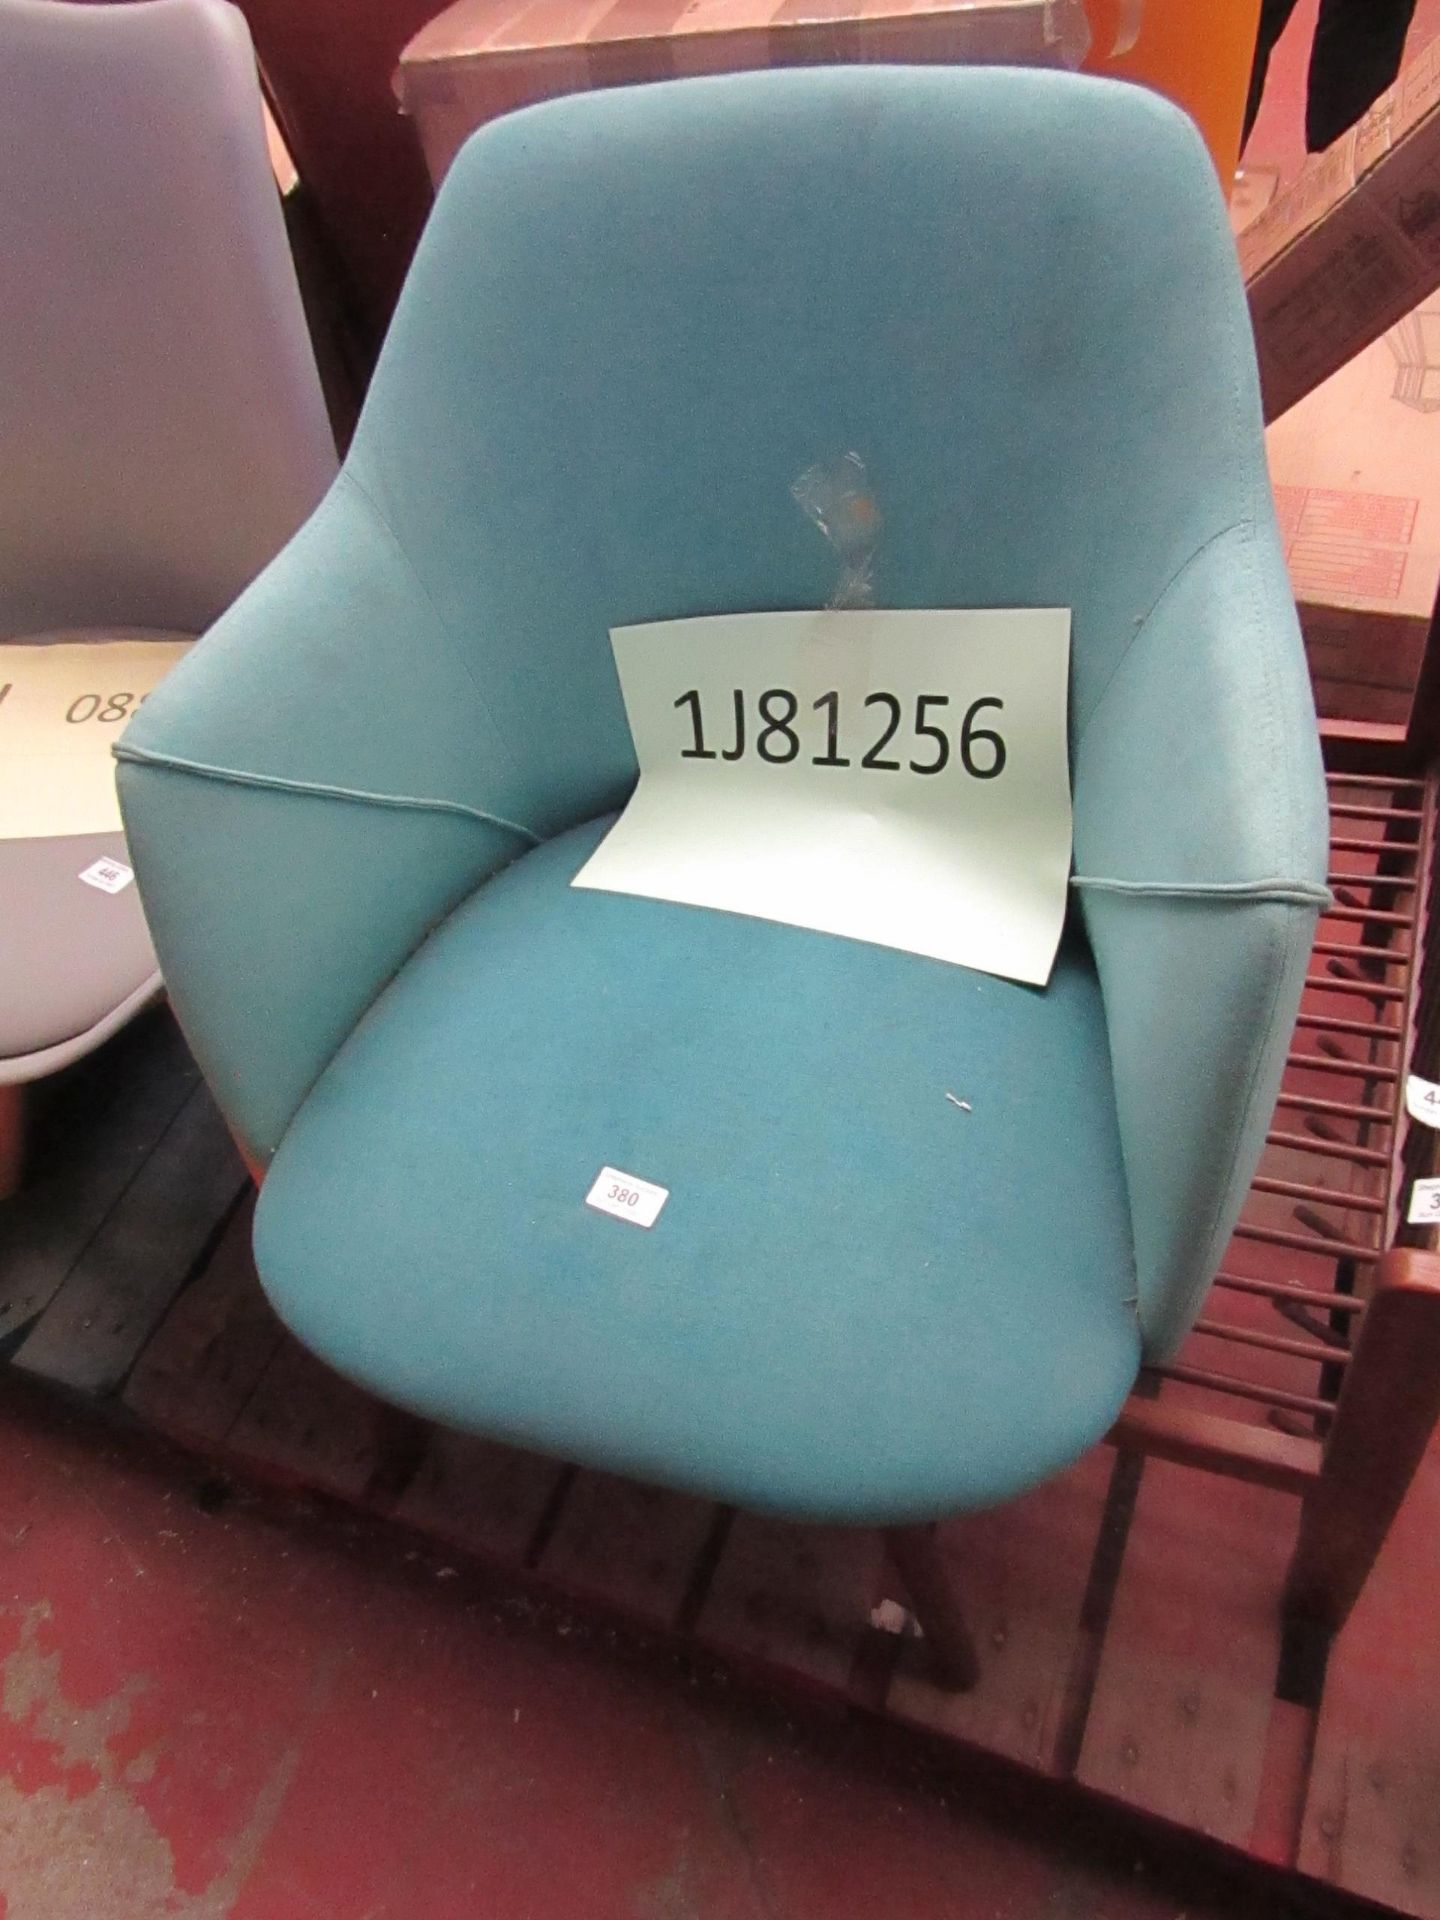 | 1X | MADE.COM LULE OFFICE CHAIR | MINERAL BLUE & EMERALD GREEN | UNCHECKED & BOXED | RRP £179 |